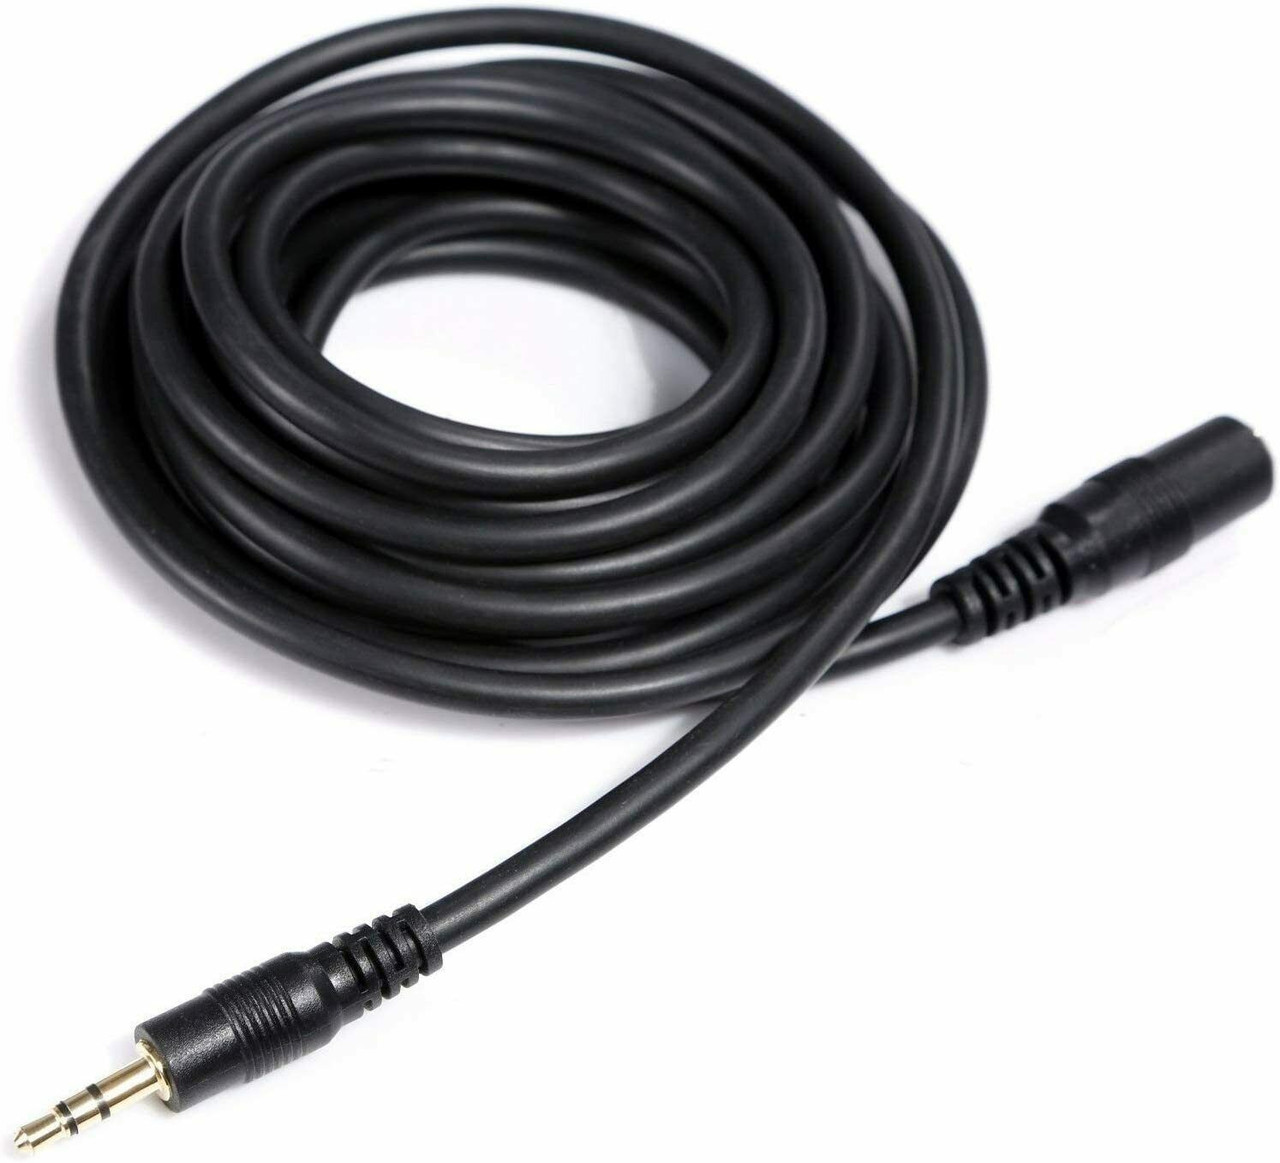 3.5mm Audio Extension Cable Stereo Headphone Cord Male to Female Car AUX MP3 LOT